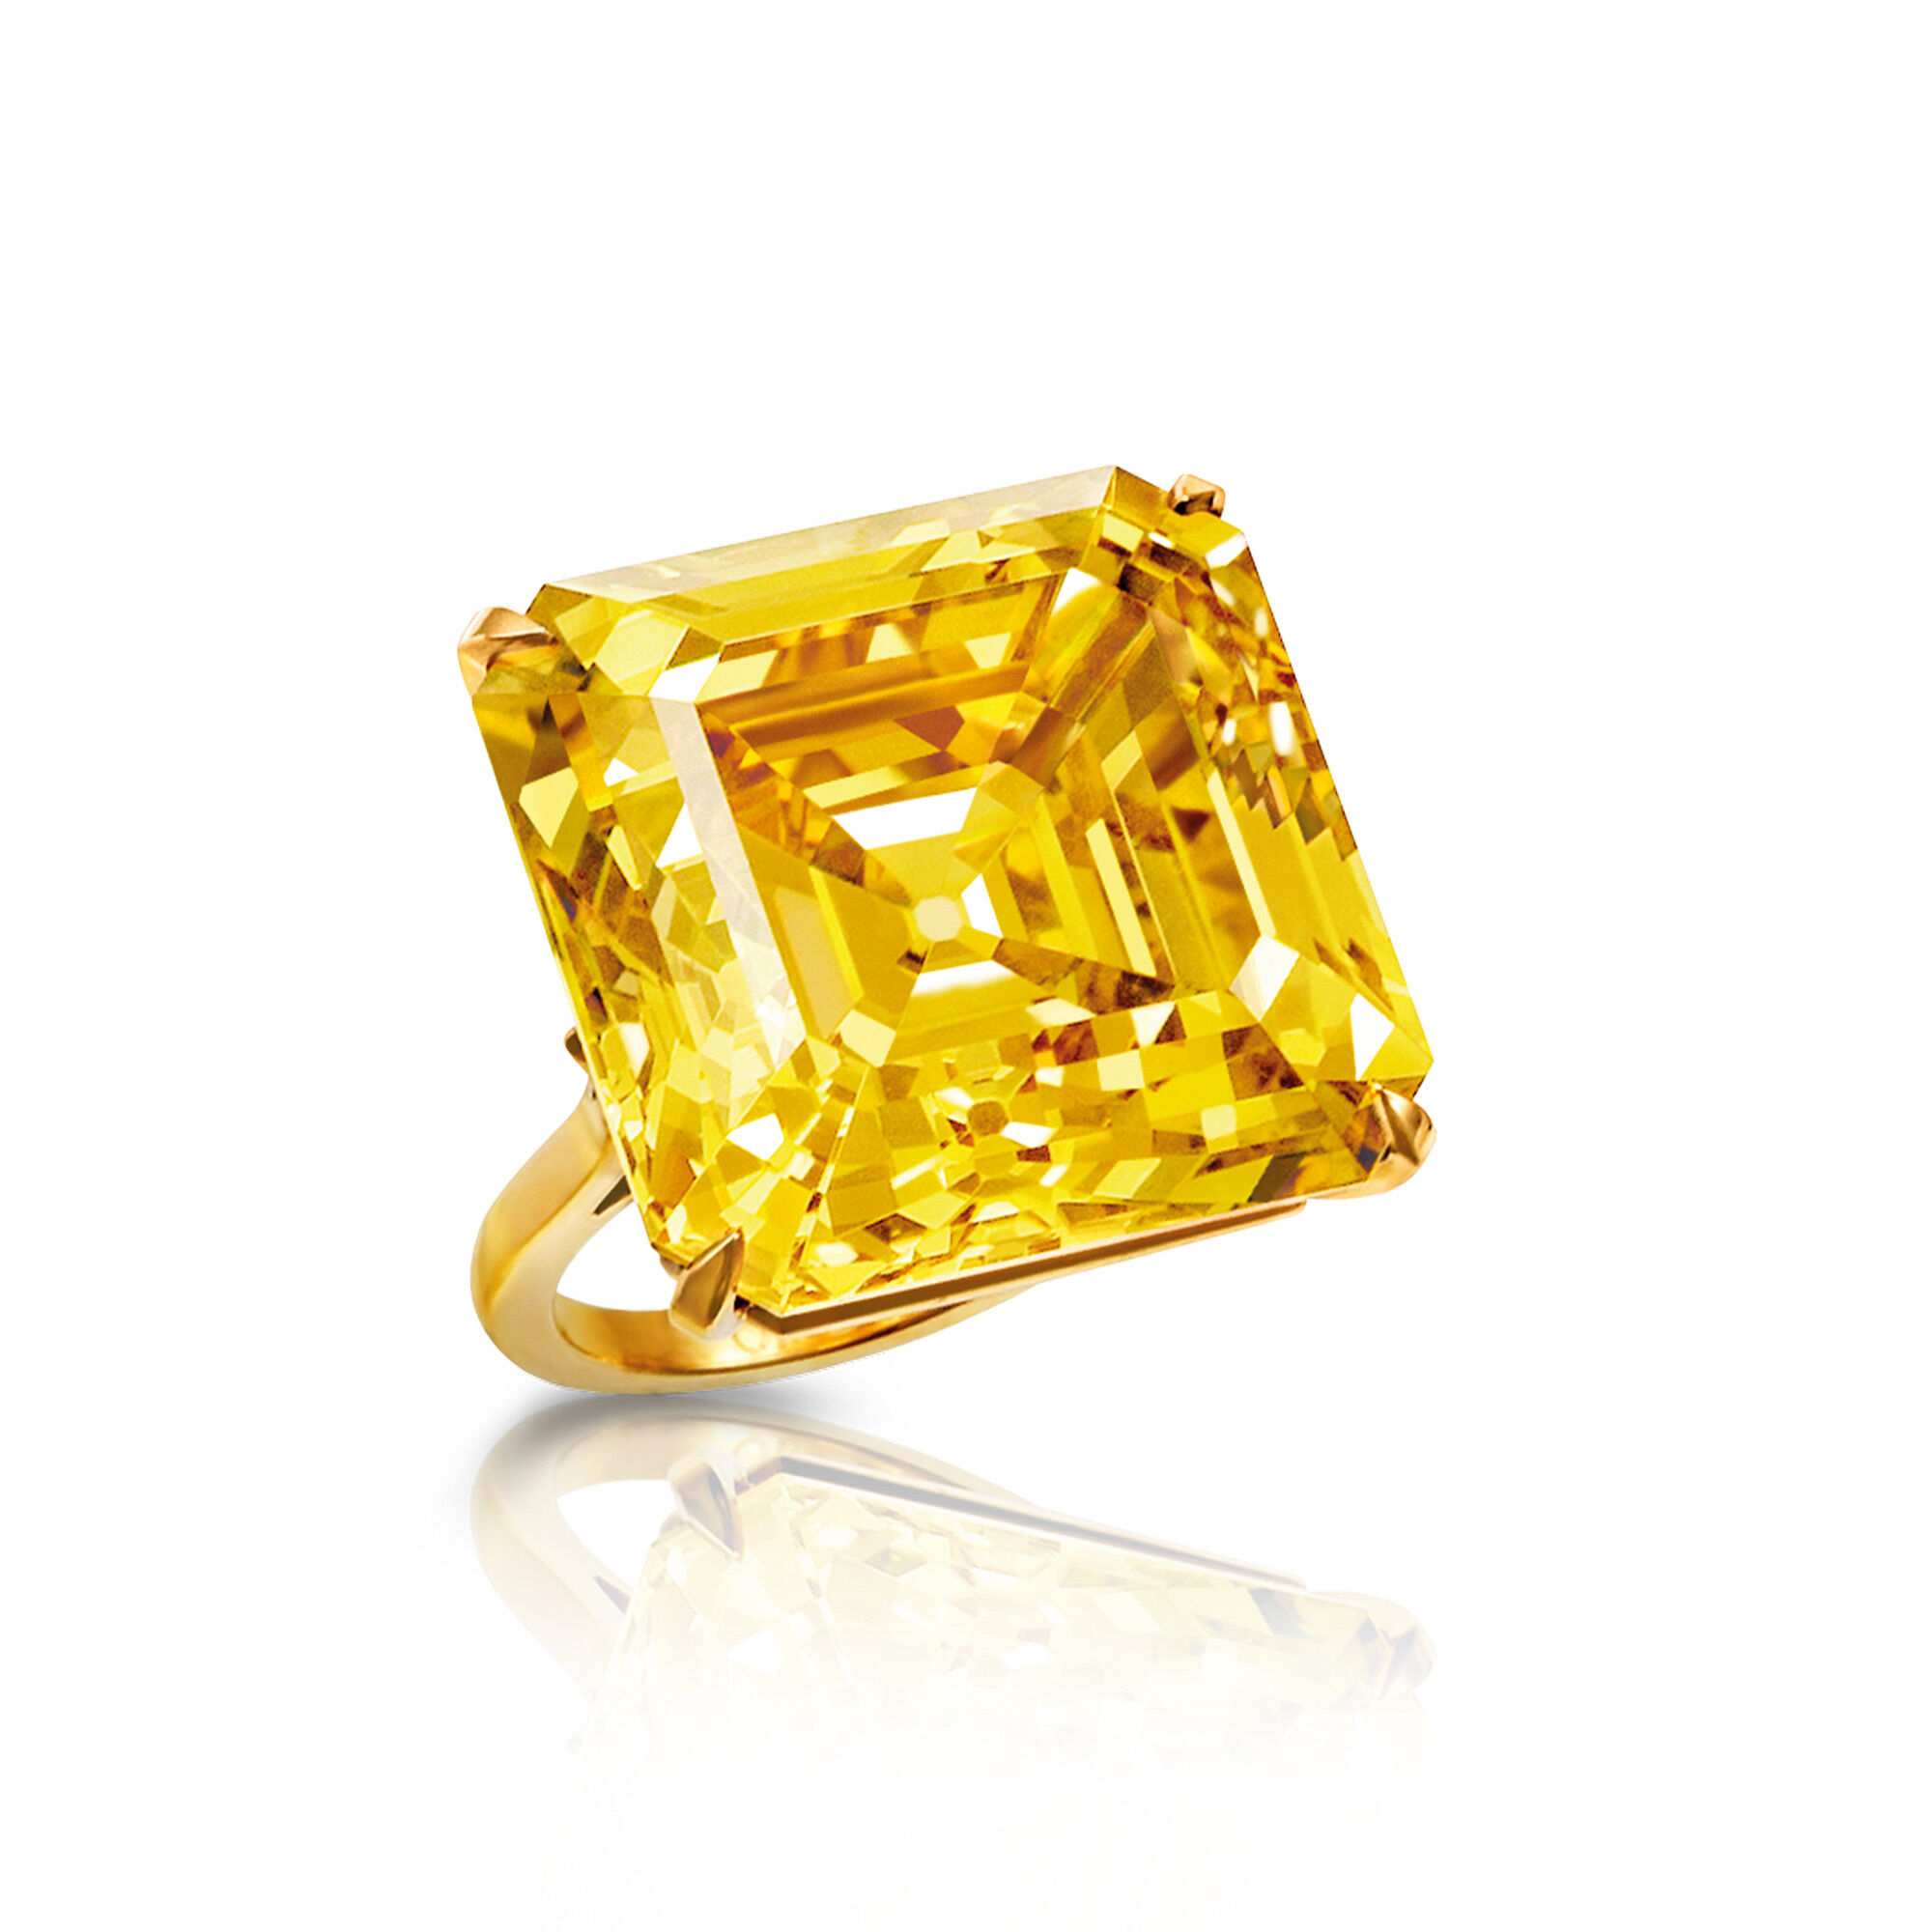 The 'Star Of Bombay' Famous Yellow Diamond from Graff